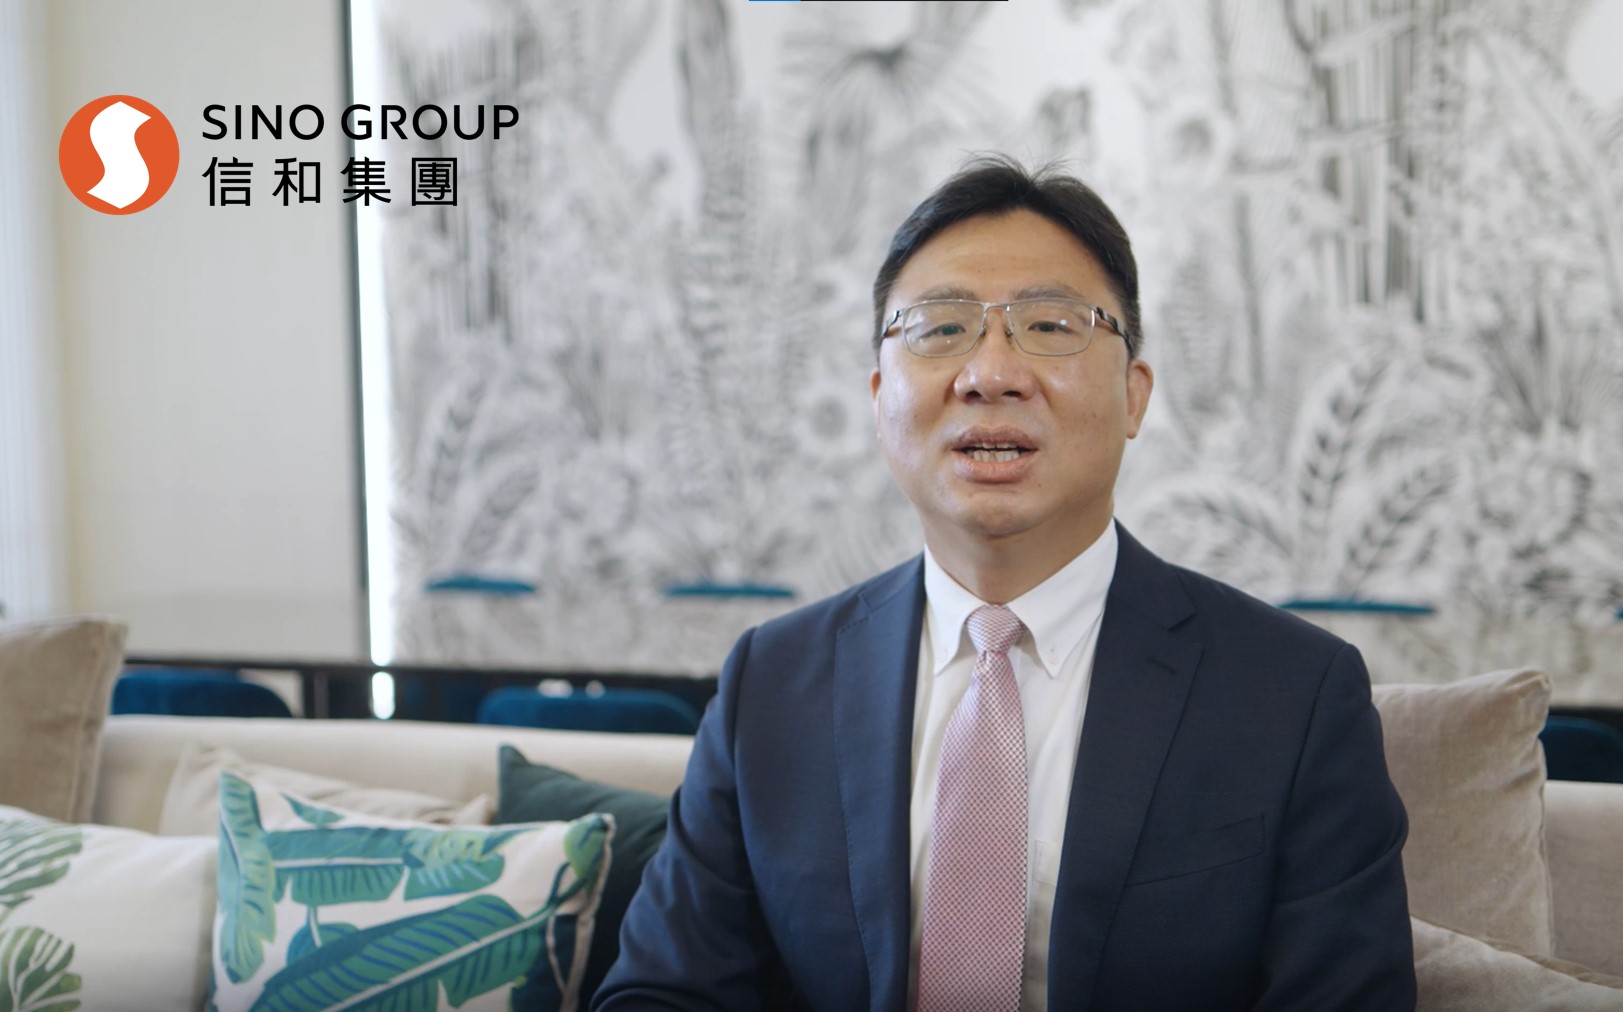 HKT and Sino Group team up to develop PropTech faster